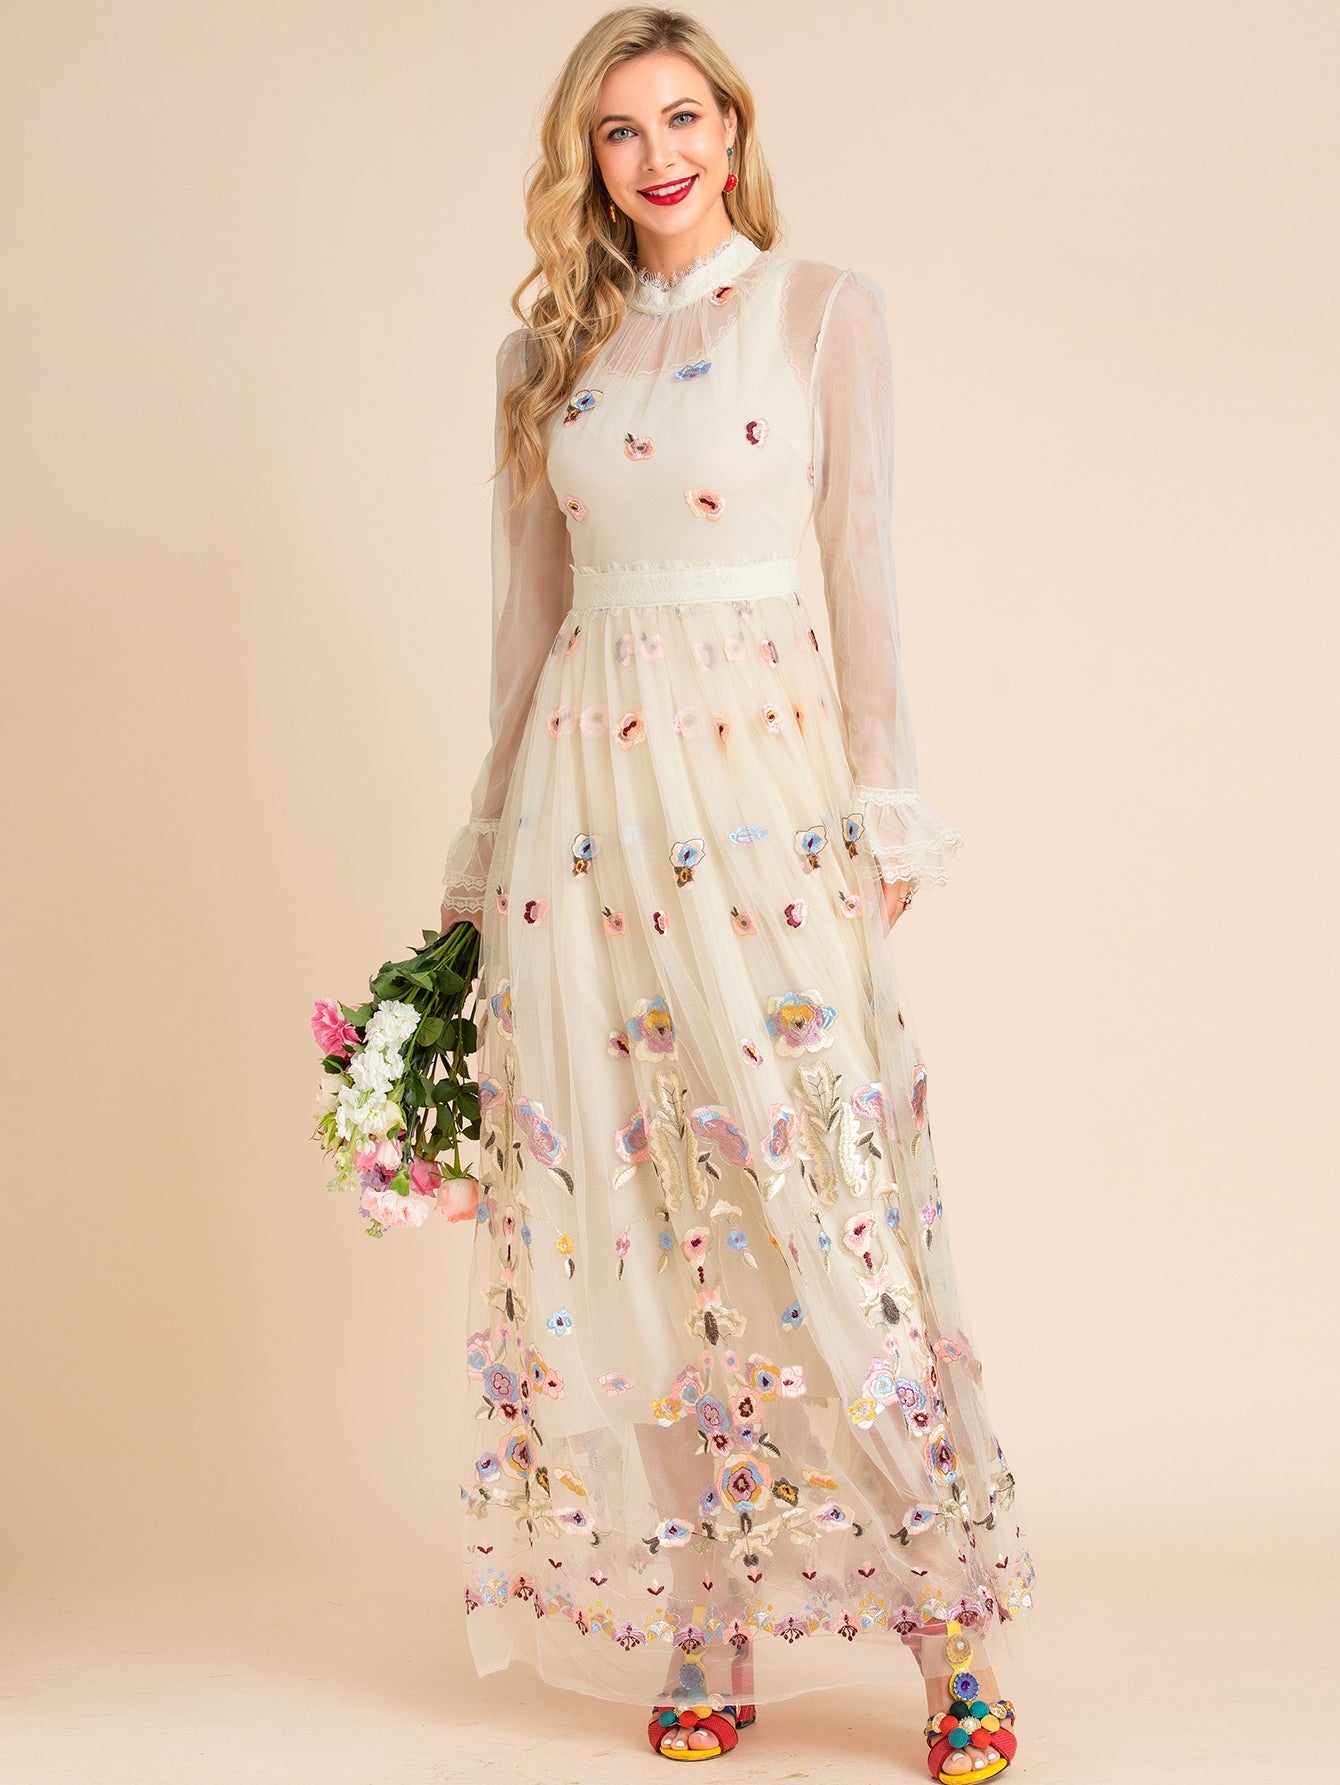 Lexy Floral Embroidery Vintage Party Dress Women